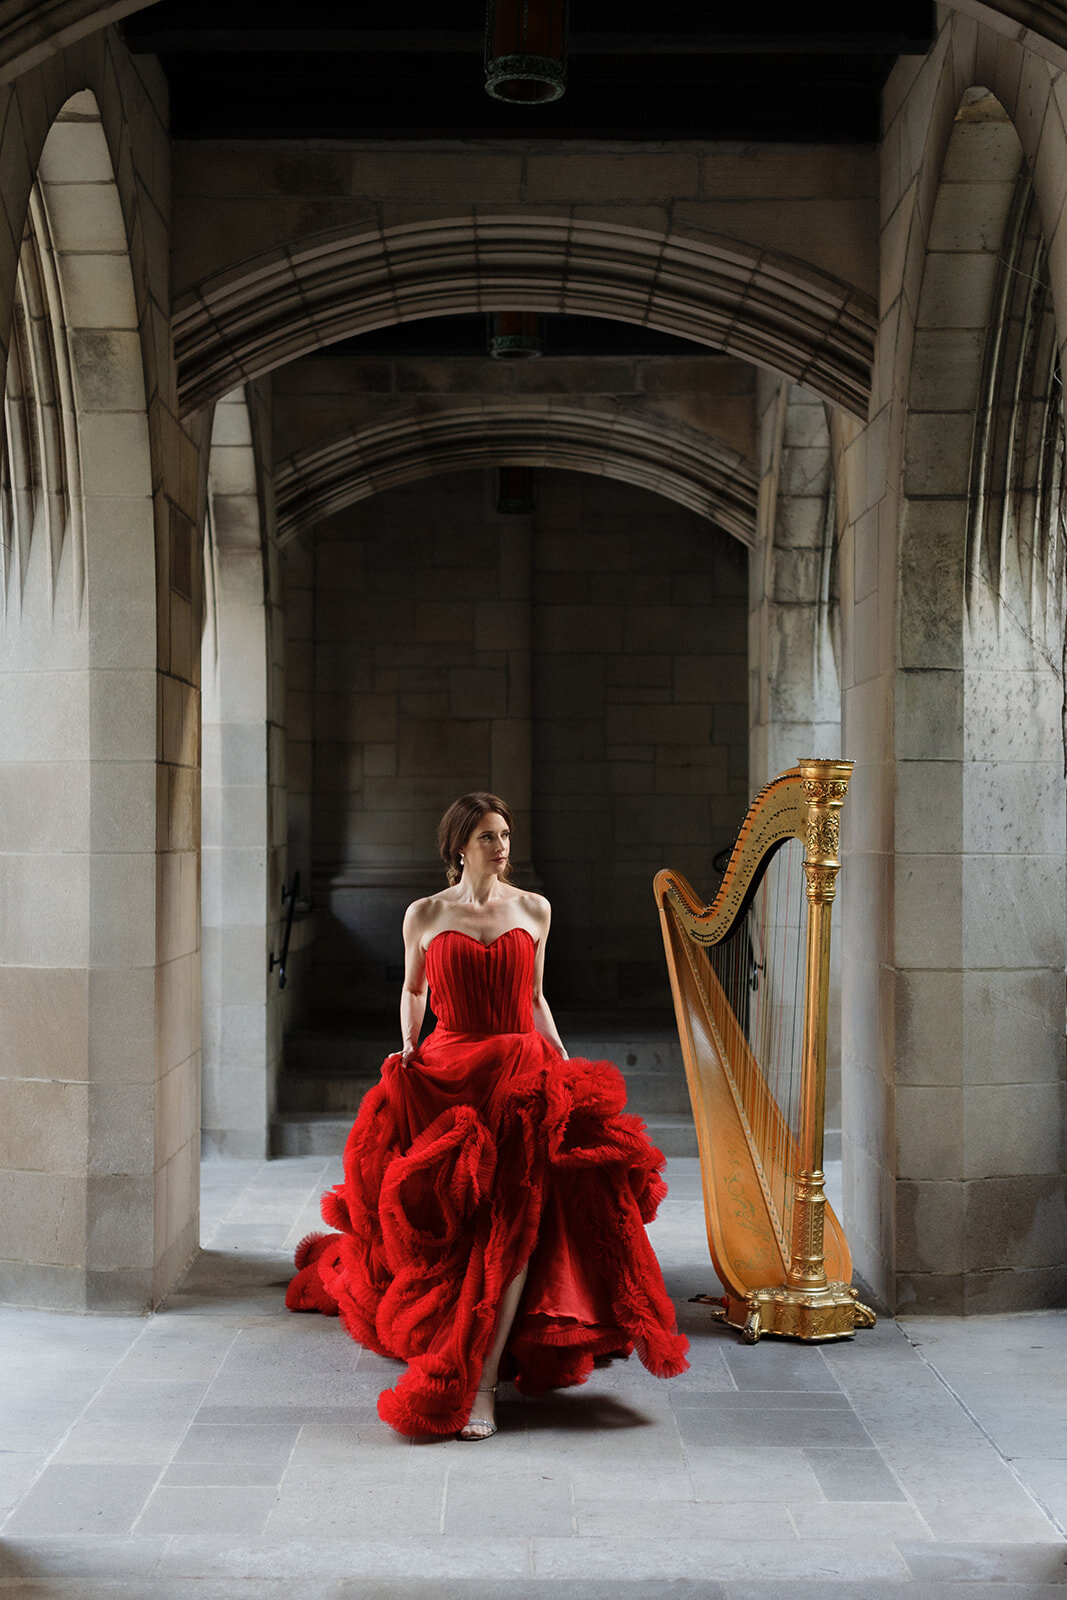 fair skinned woman is wearing a very long red gown, walking toward the camera with a hold harp nearby. She is walking in a cloister with beautiful light filtered in.